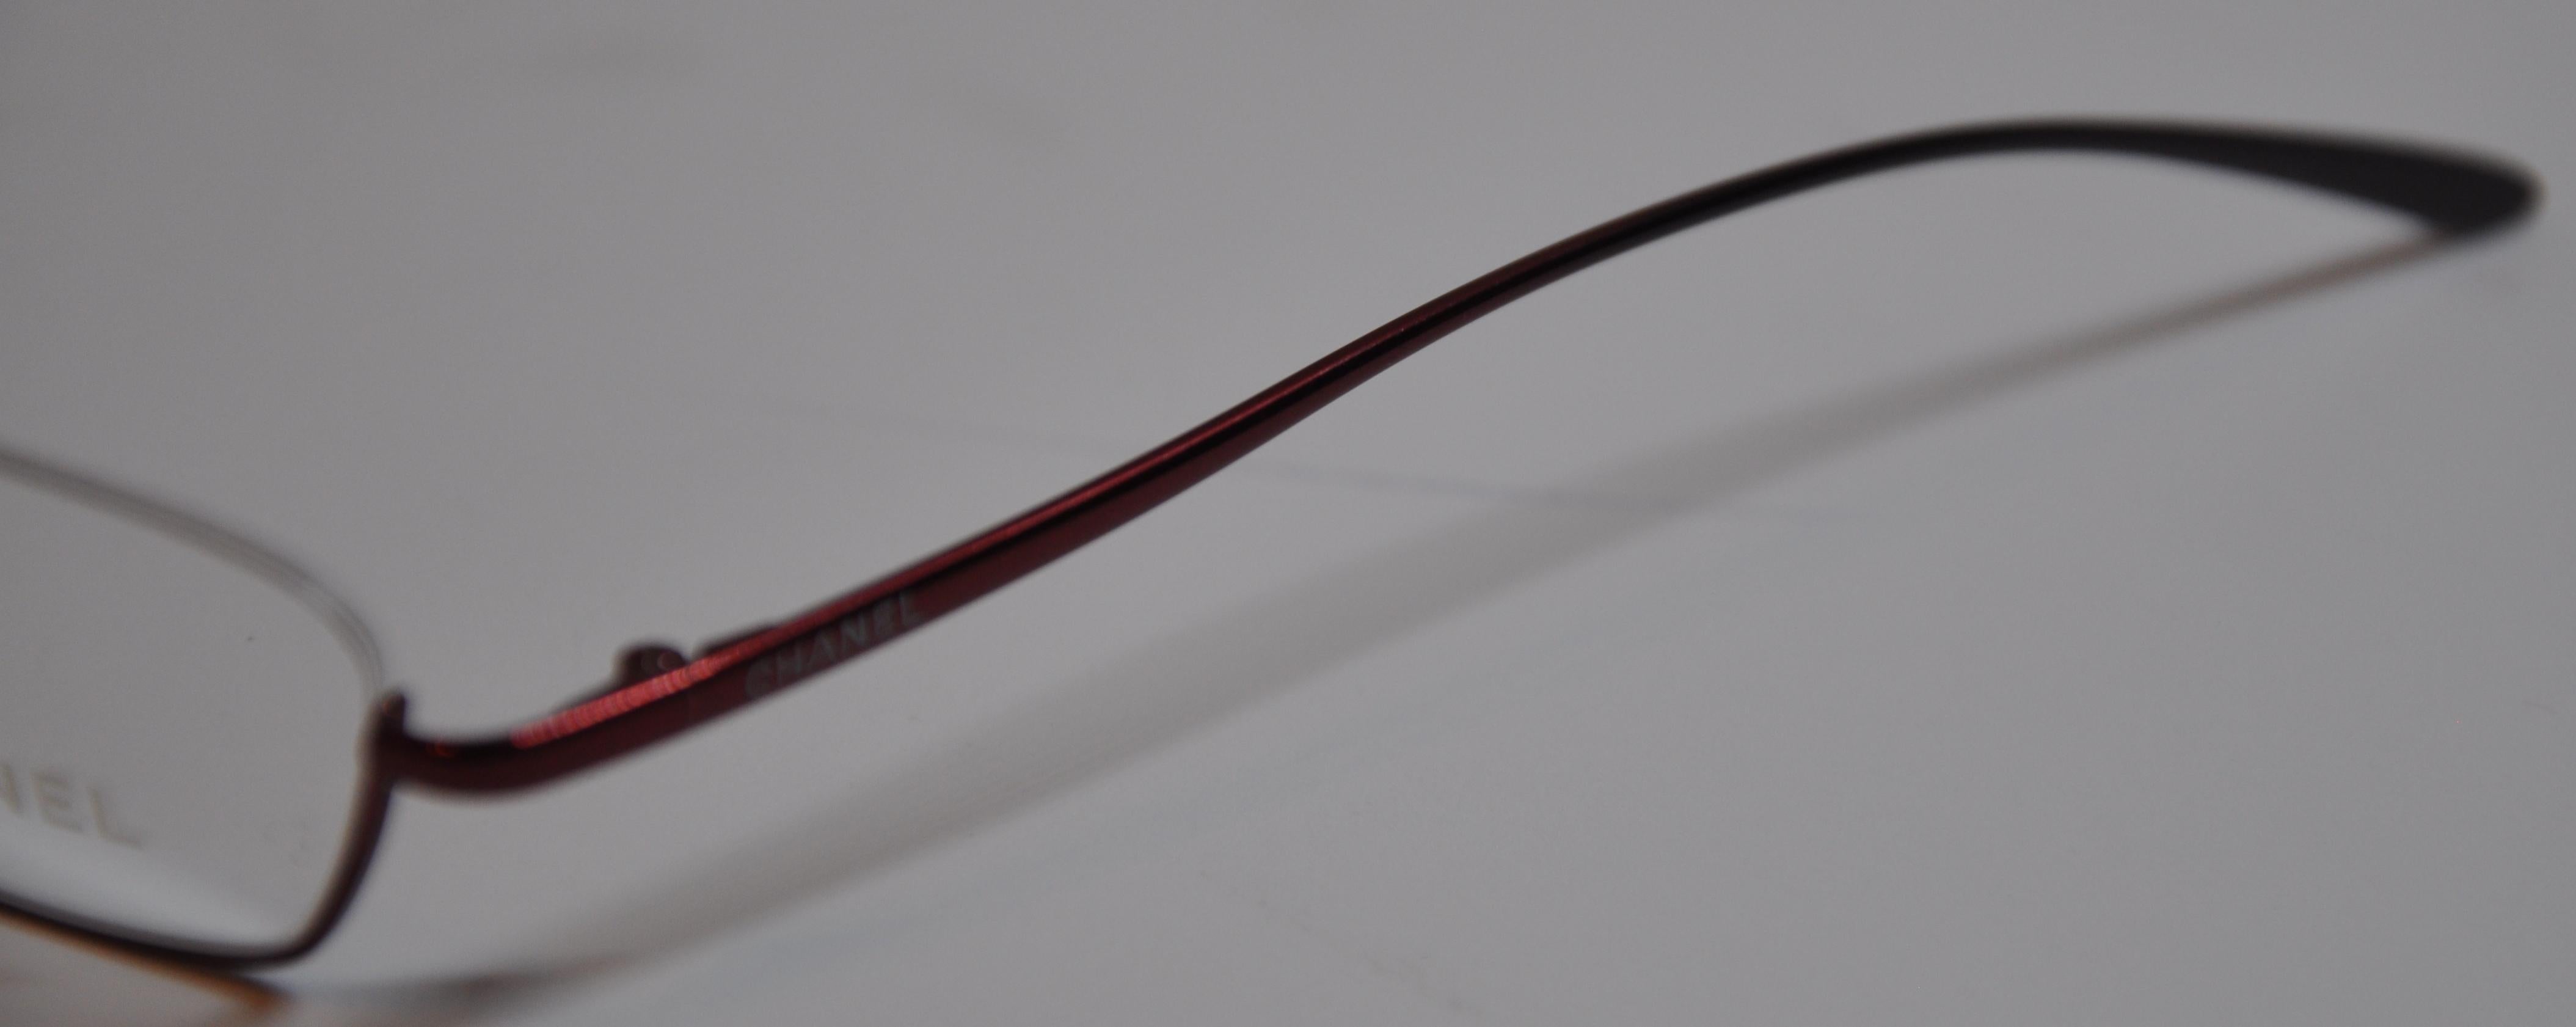   Chanel wonderfully elegant titanium iridescent cranberry-red weightless reading glasses is detailed with curved corners on the front as well as streamline curved arms. The front measures 5 1/8 inches across, height is 1 inch, and the arms measures